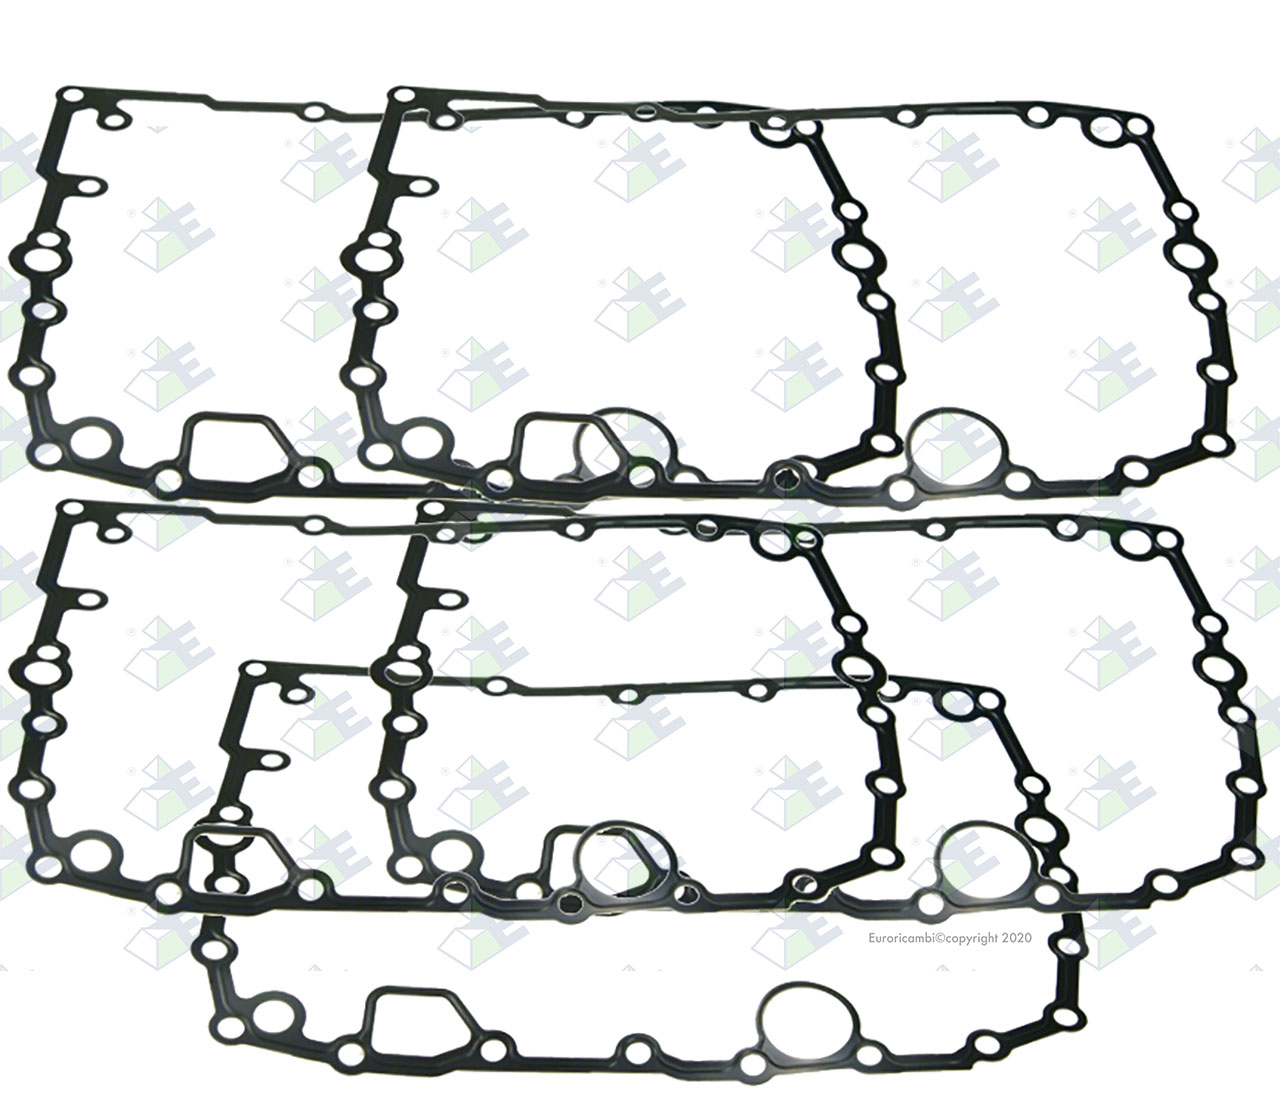 SHEET GASKET suitable to STEYER 99114221119